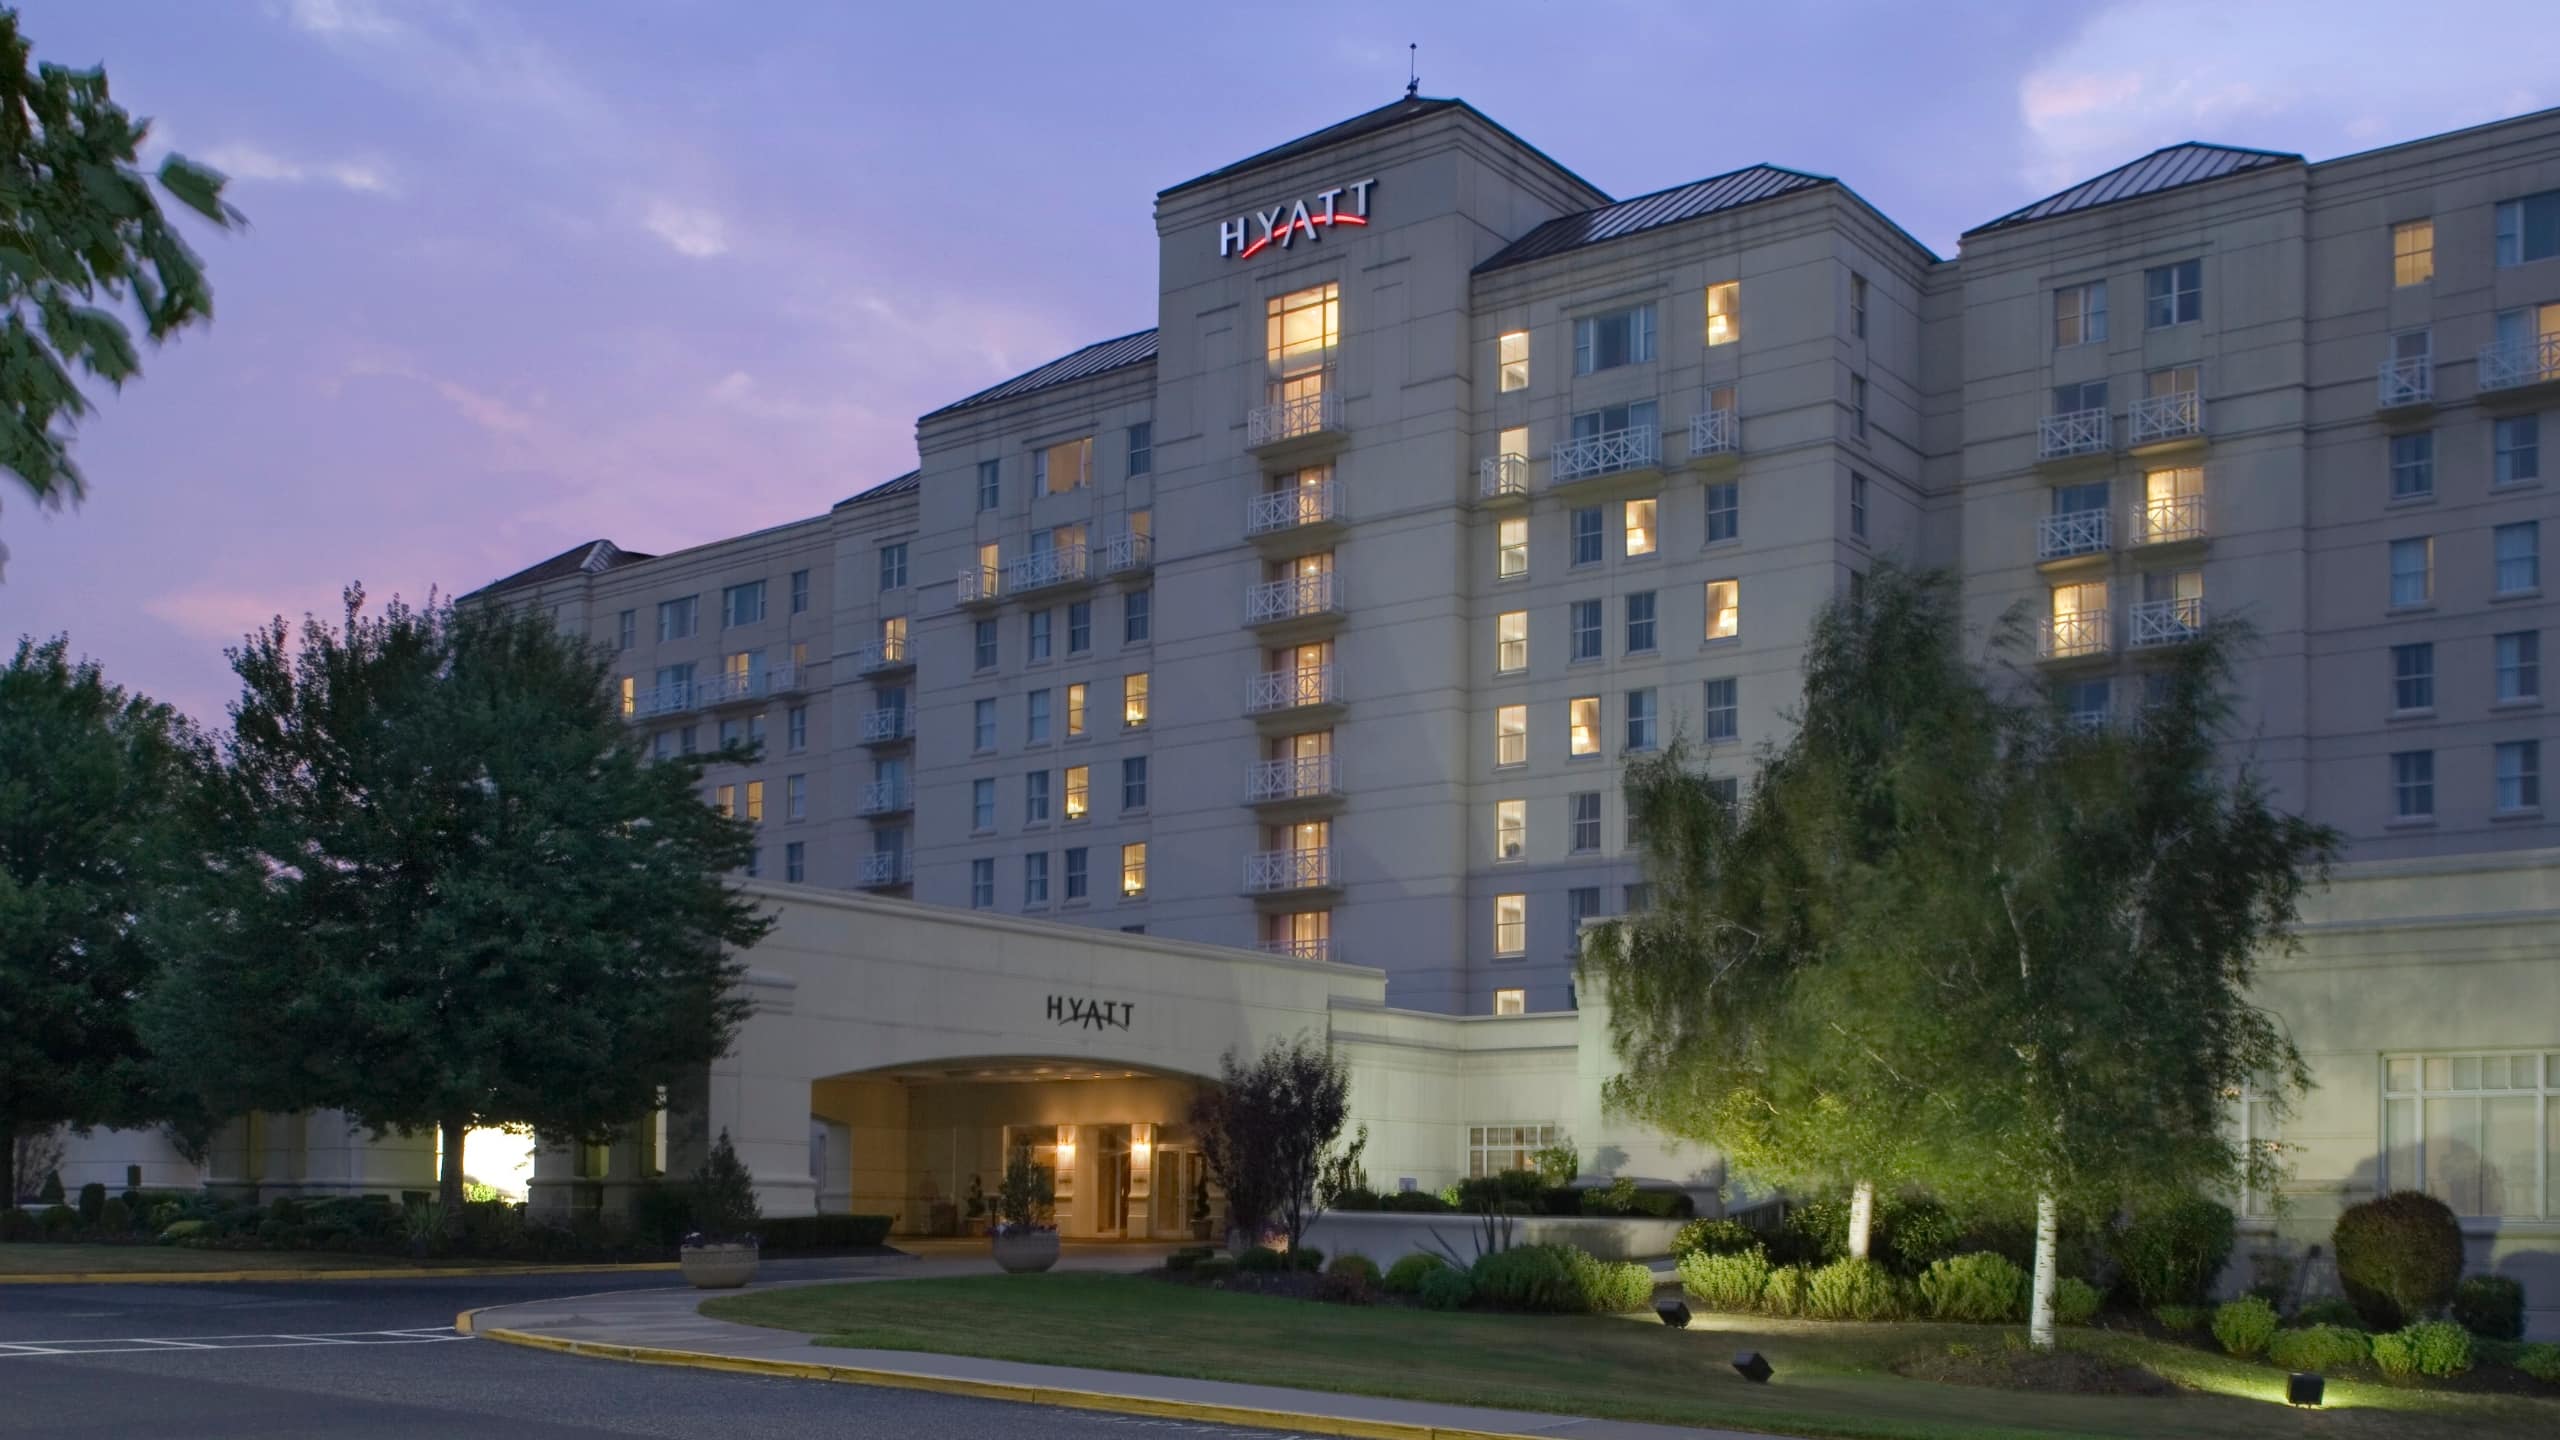 Discount [50% Off] Residence Inn Long Island Holtsville United States ...